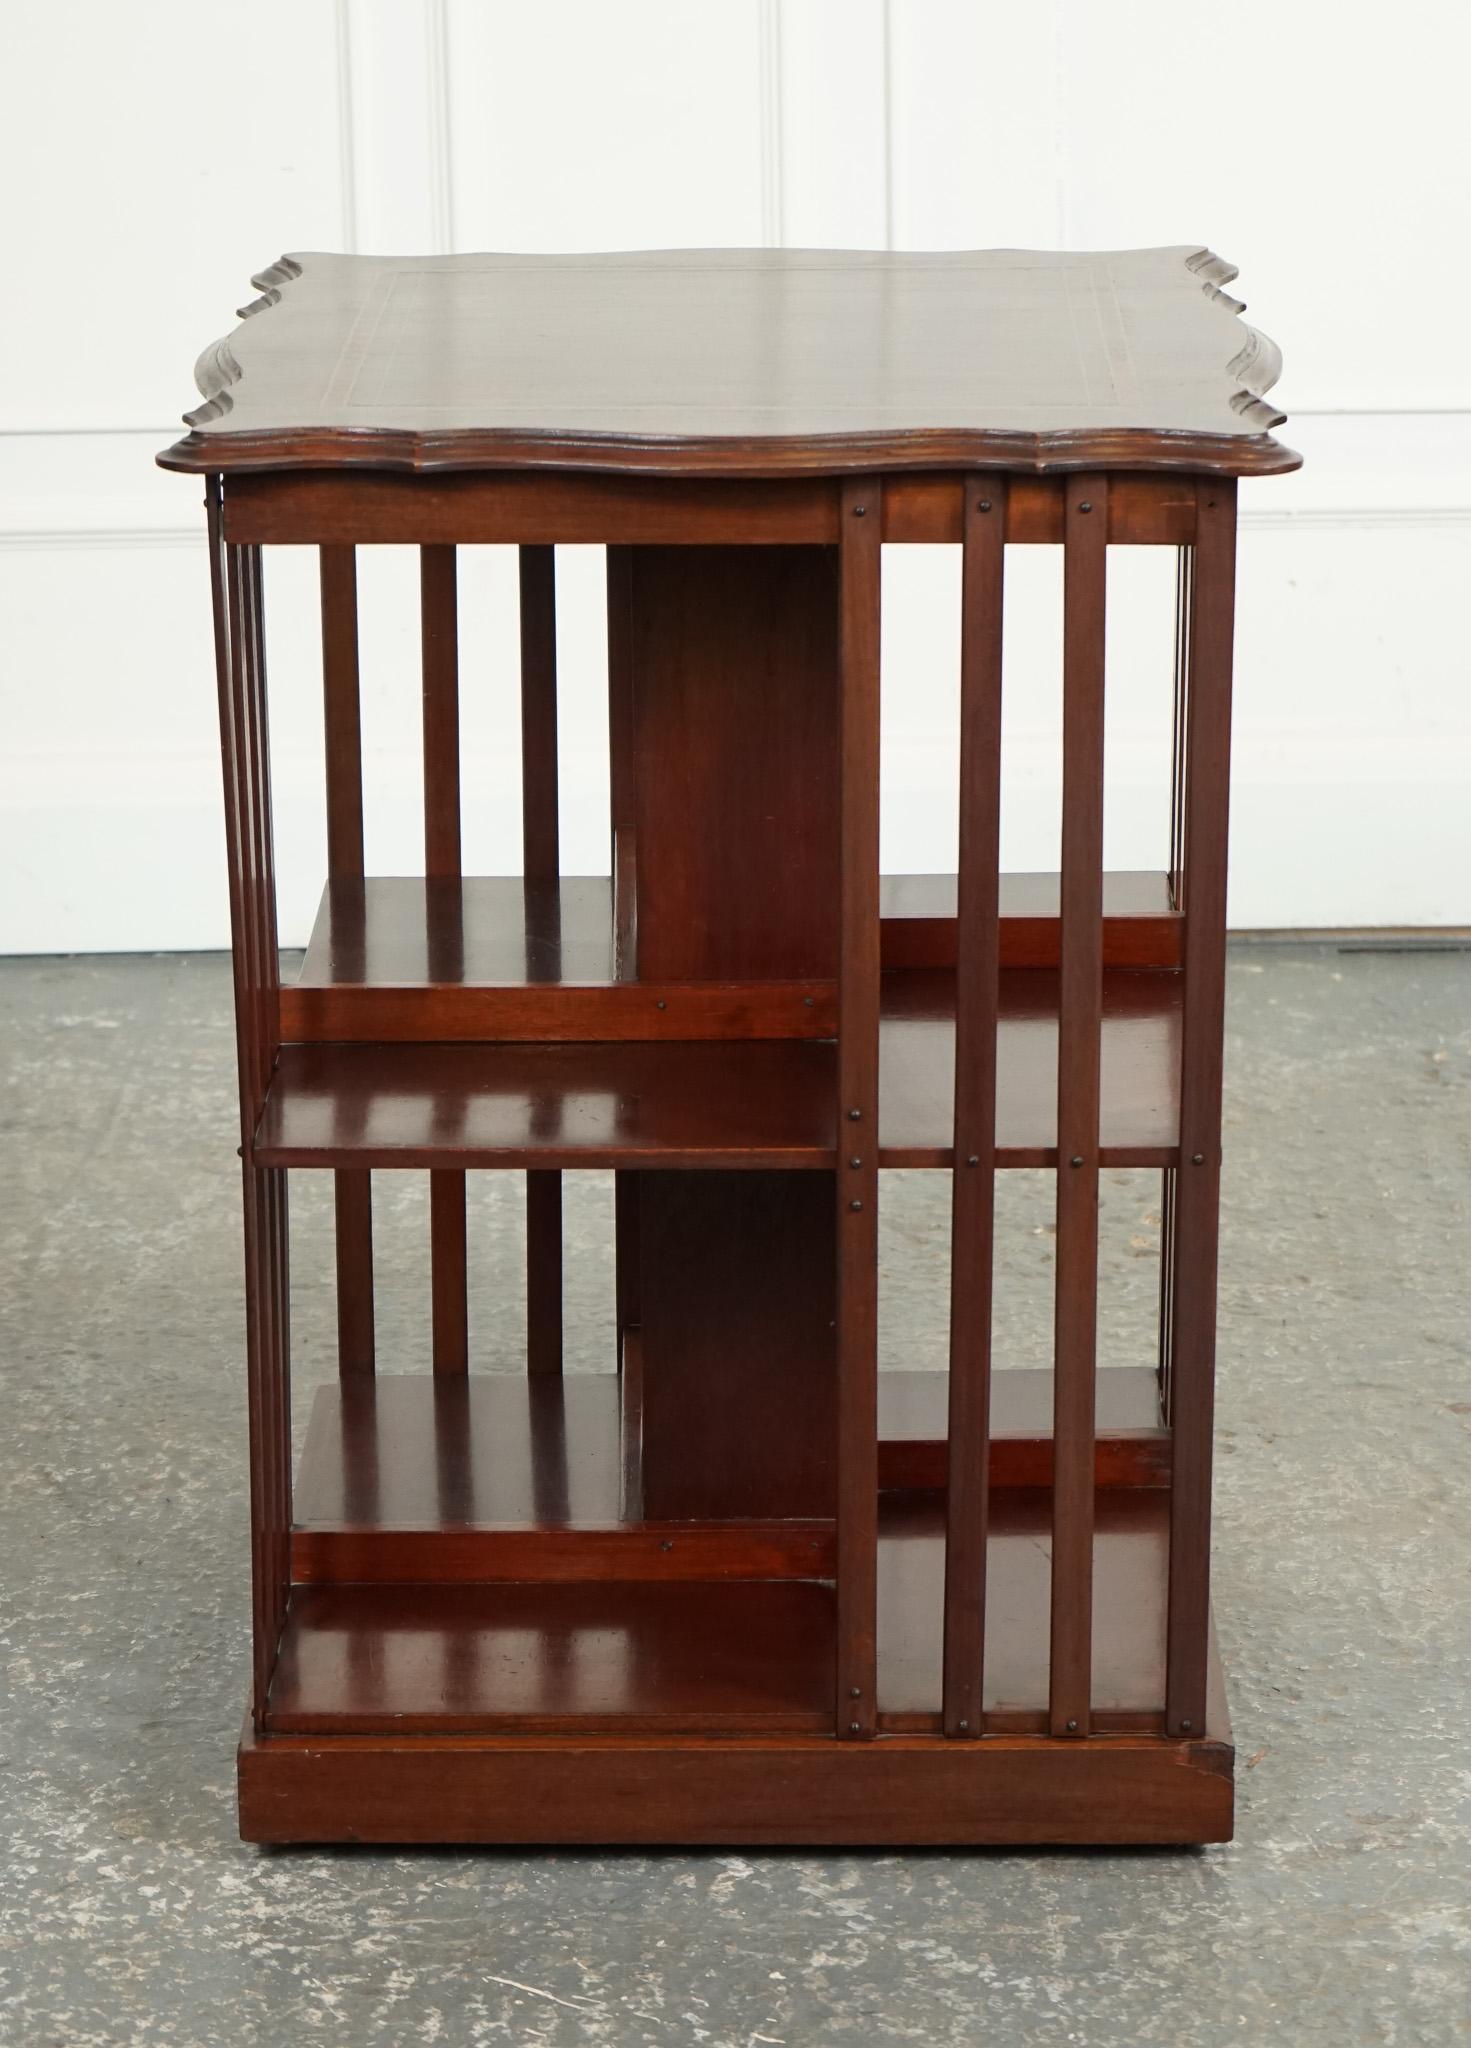 British ANTIQUE EDWARDIAN REVOLVING BOOKCASE WITH A SERPENTiNE SHAPED TOP For Sale